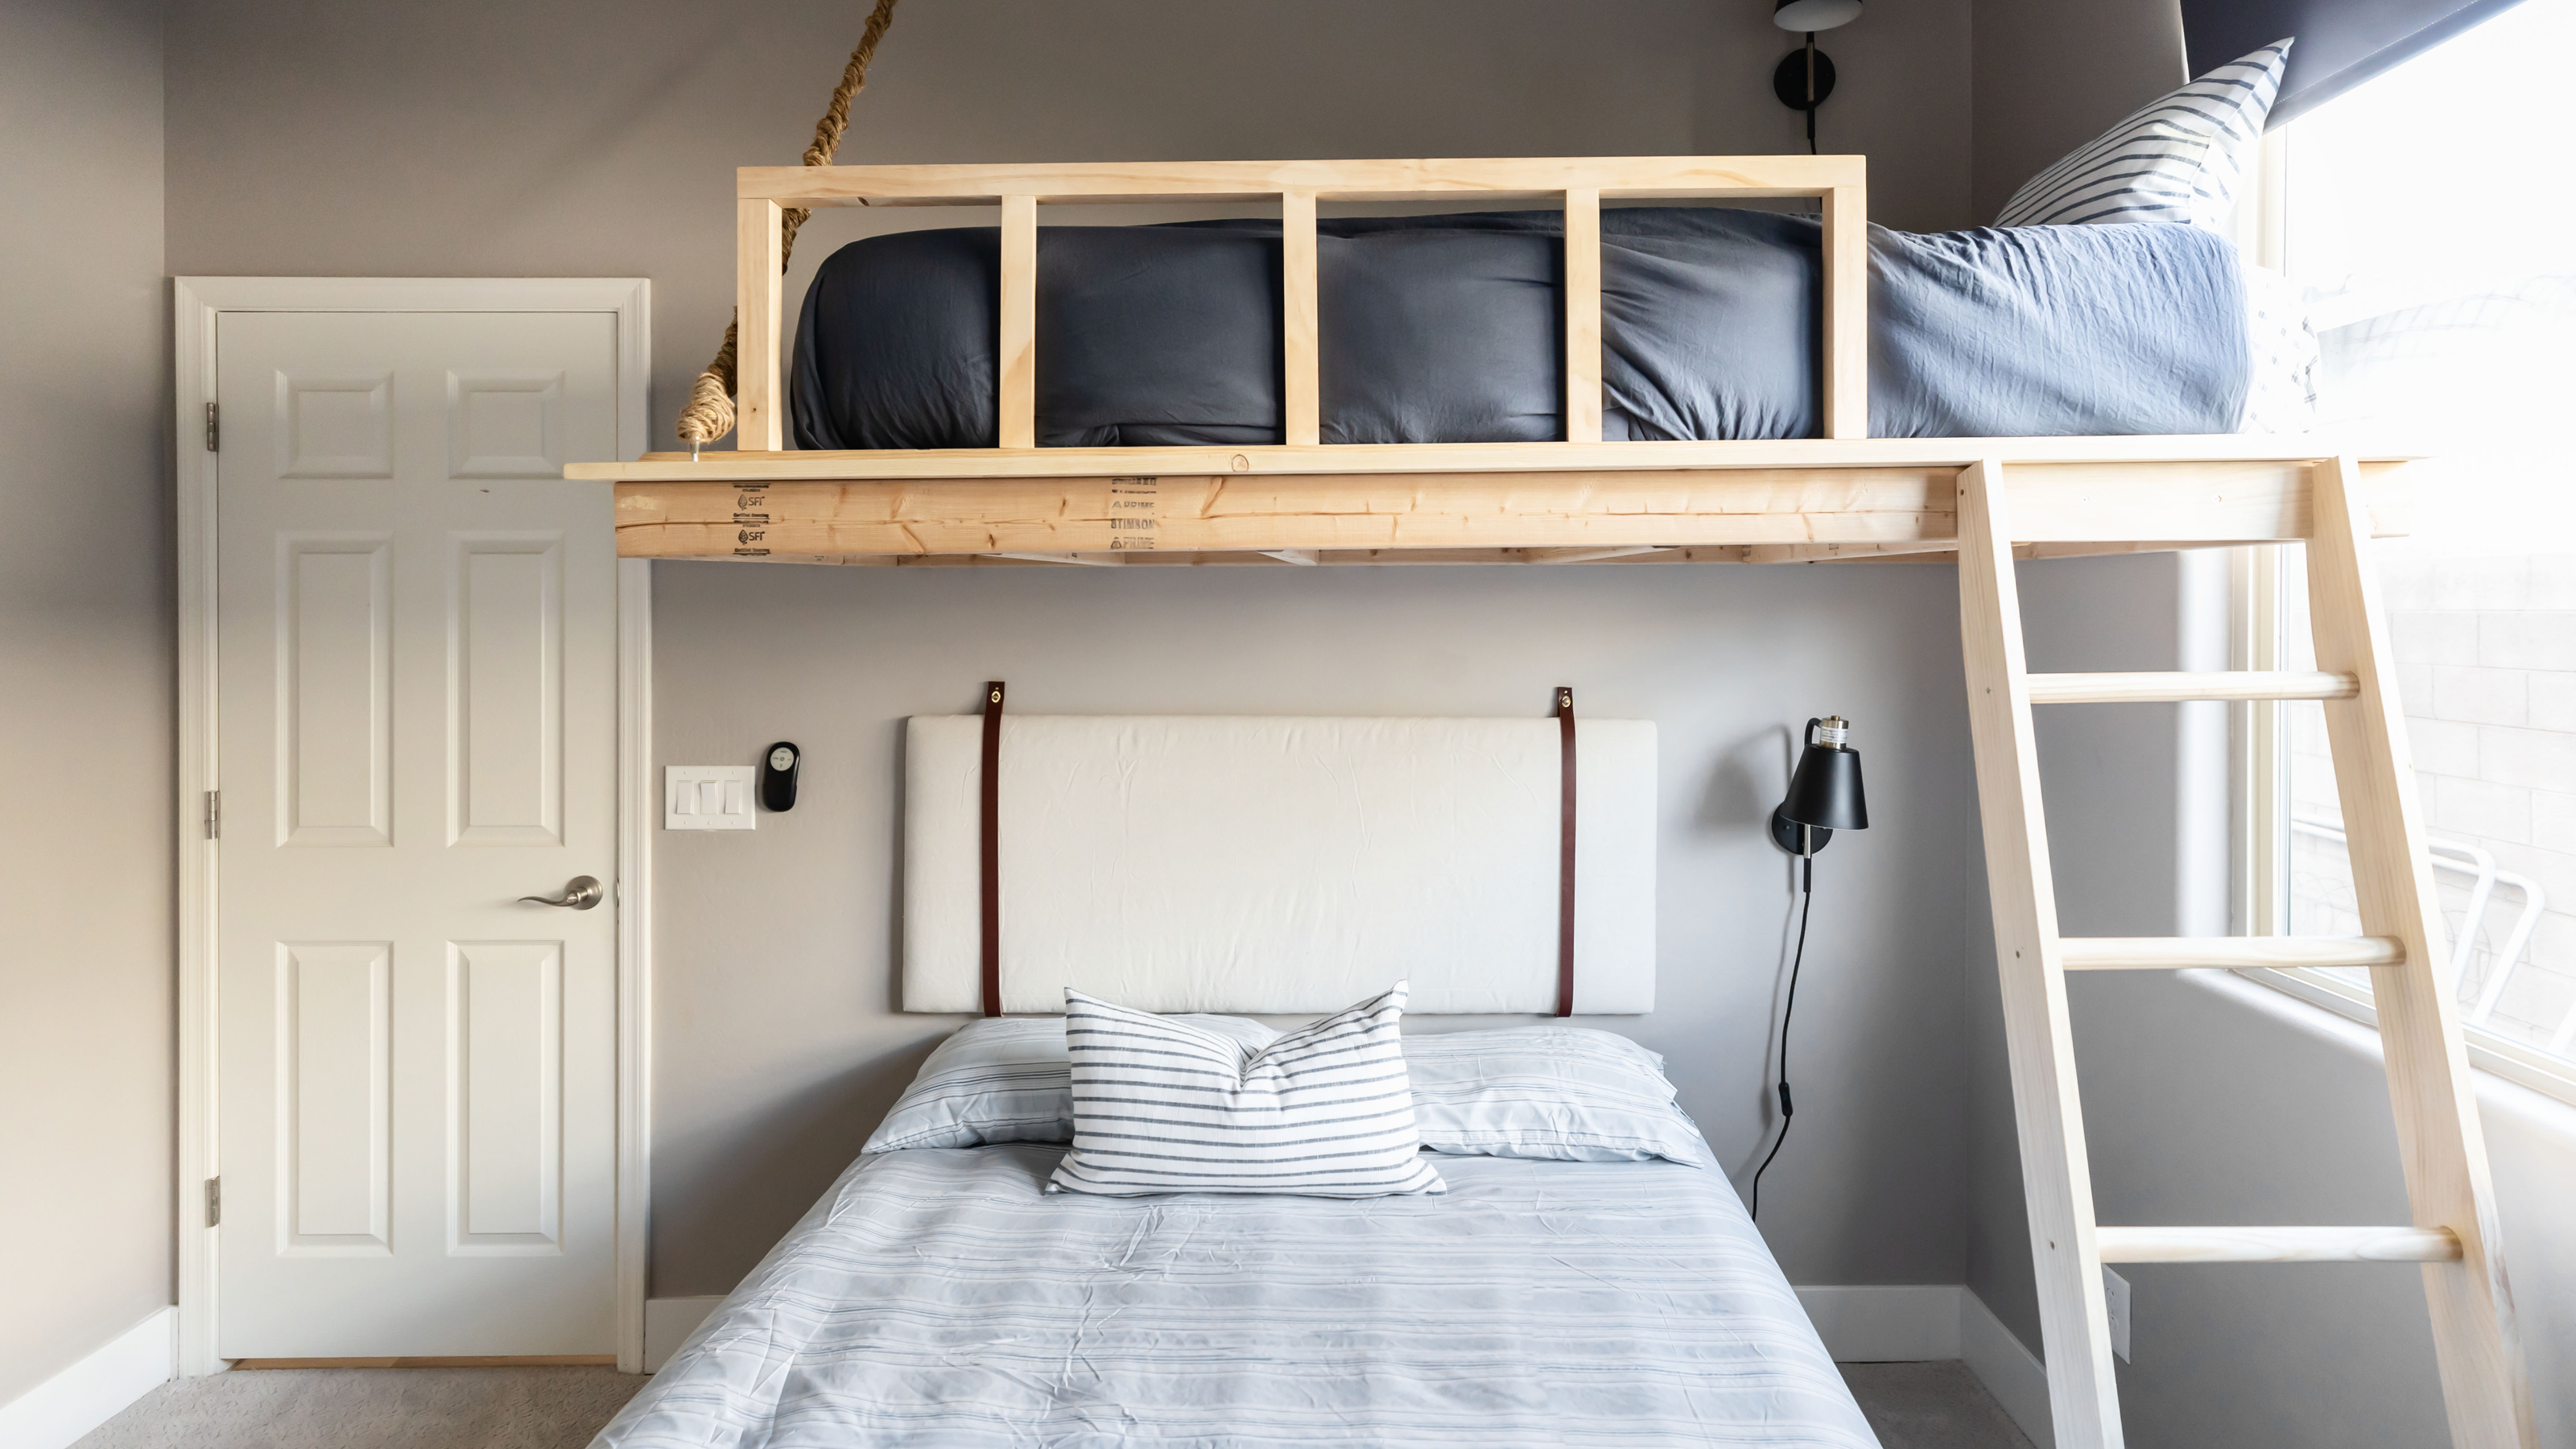 How To Build A Loft Bed Diy With This, Rope Ladder For Loft Bed